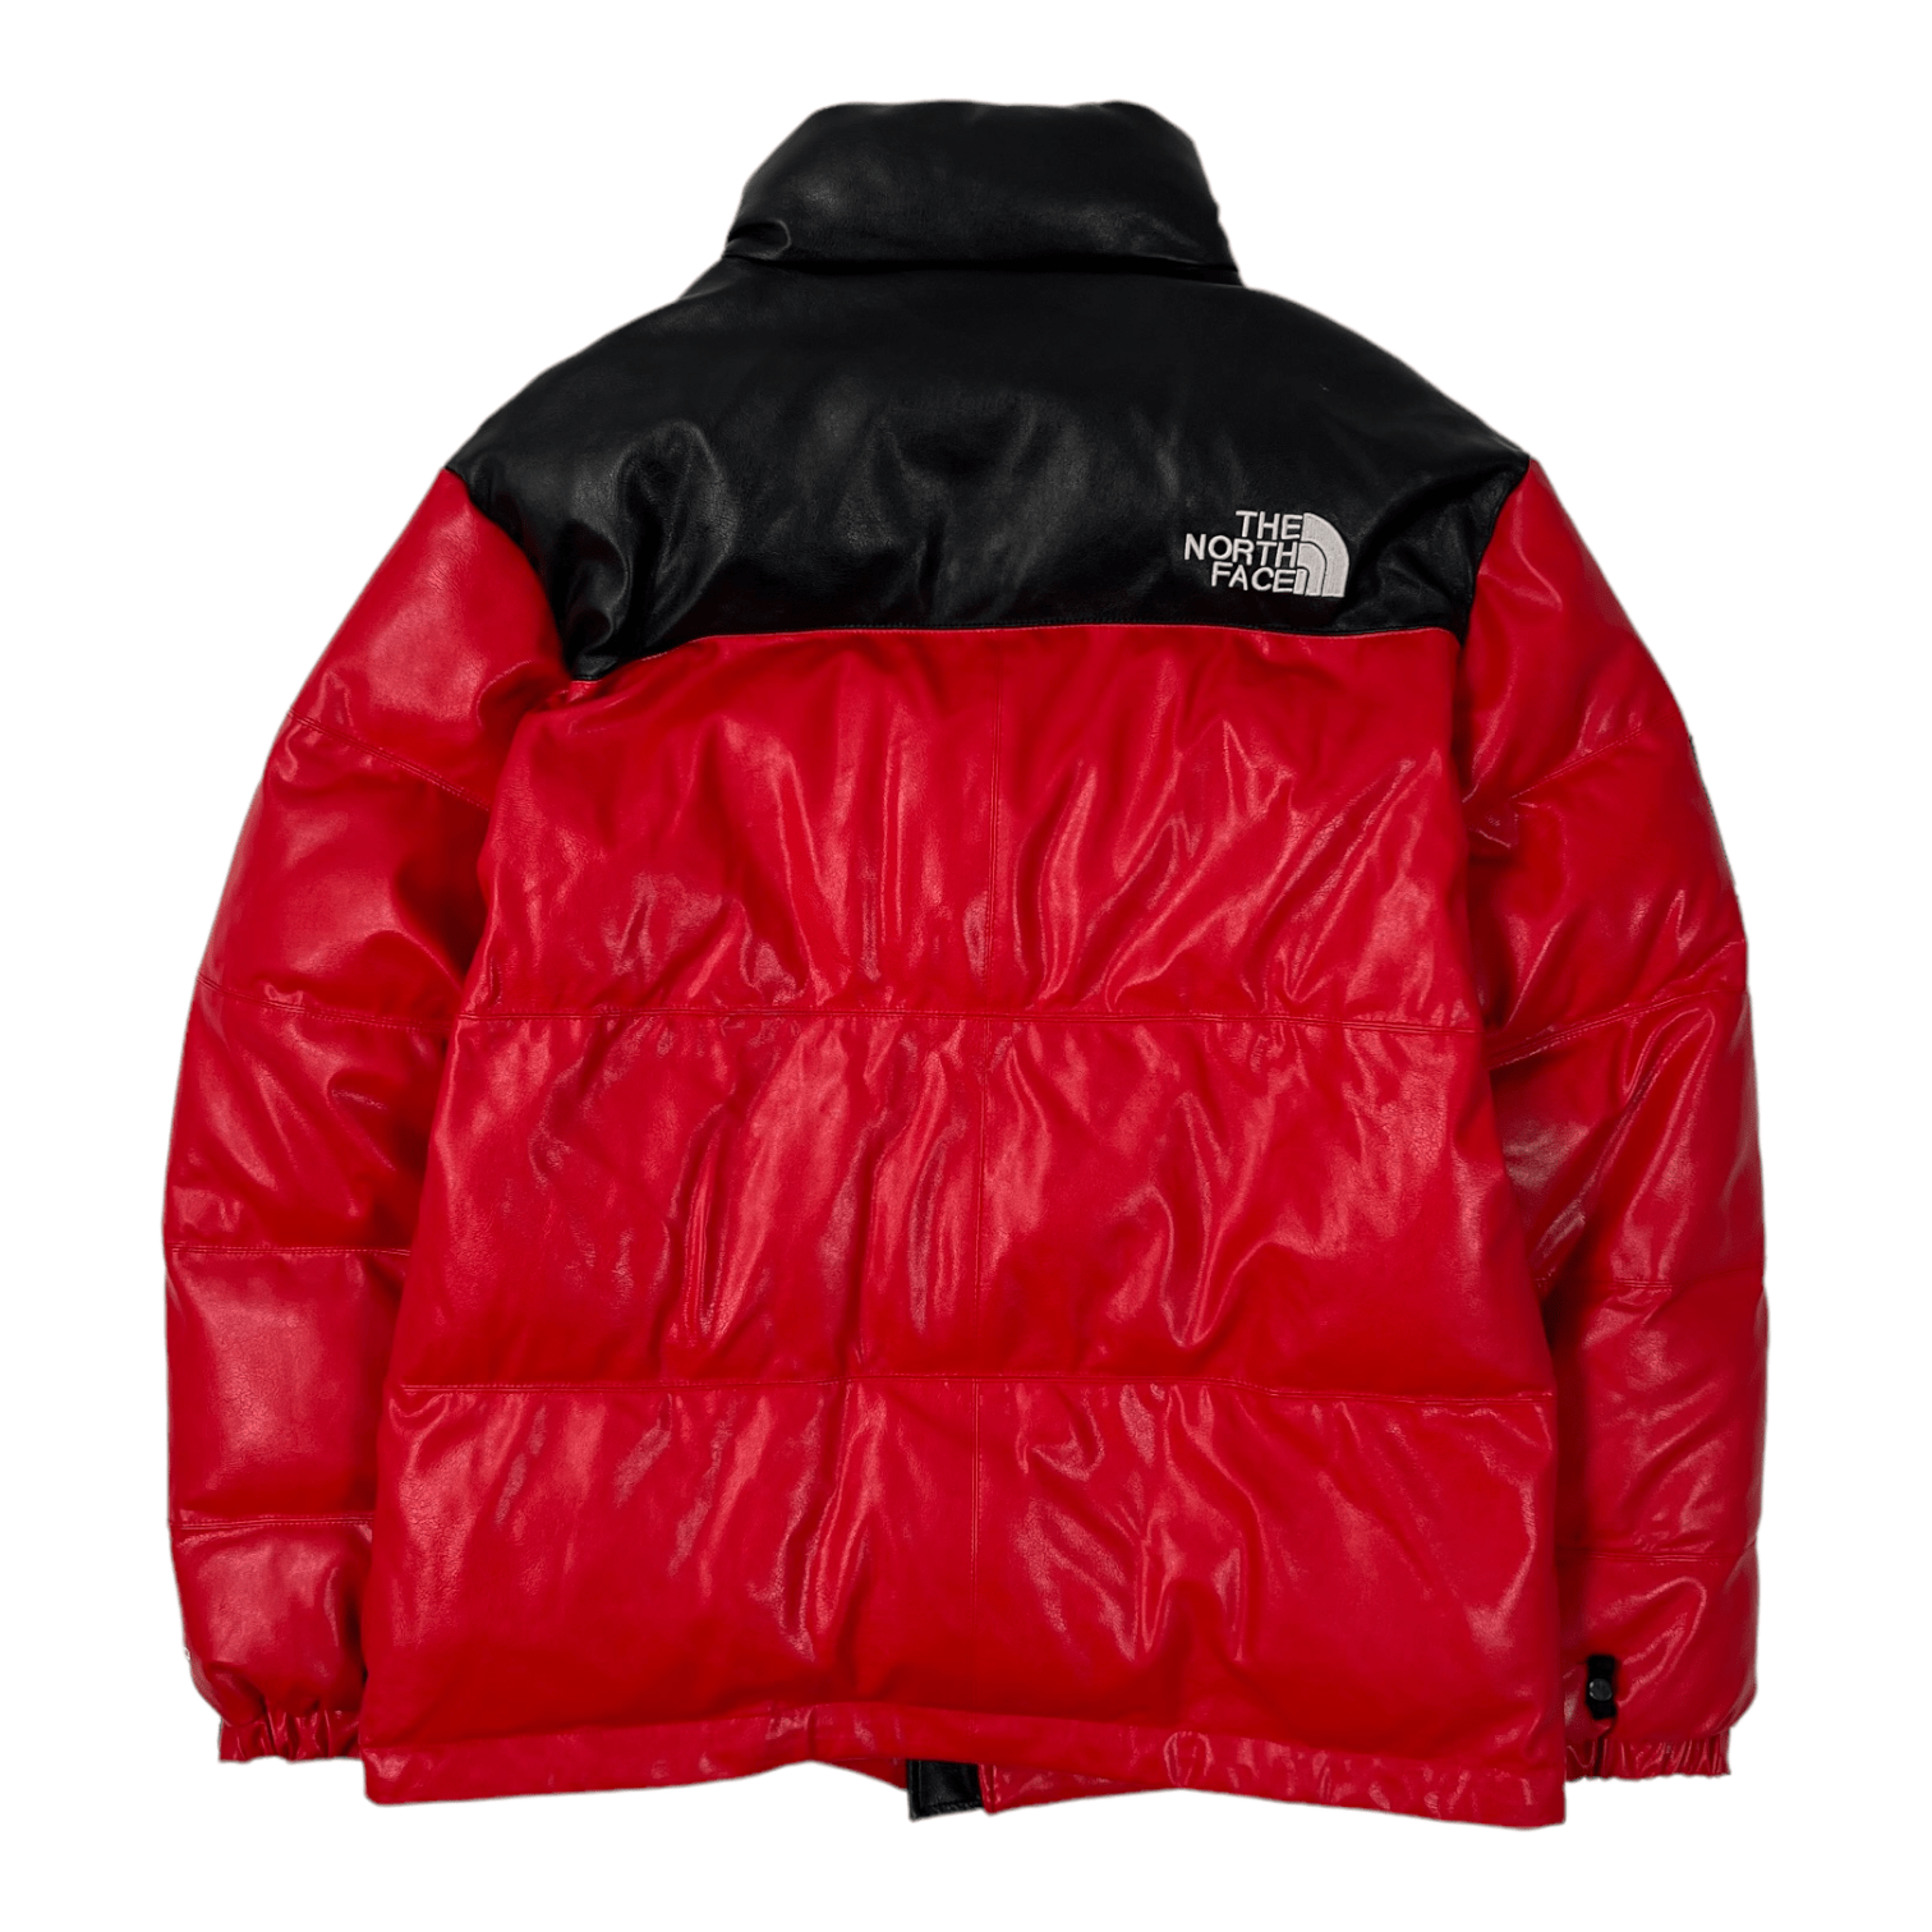 Alternate View 1 of Supreme The North Face Leather Nuptse Jacket Red Pre-Owned